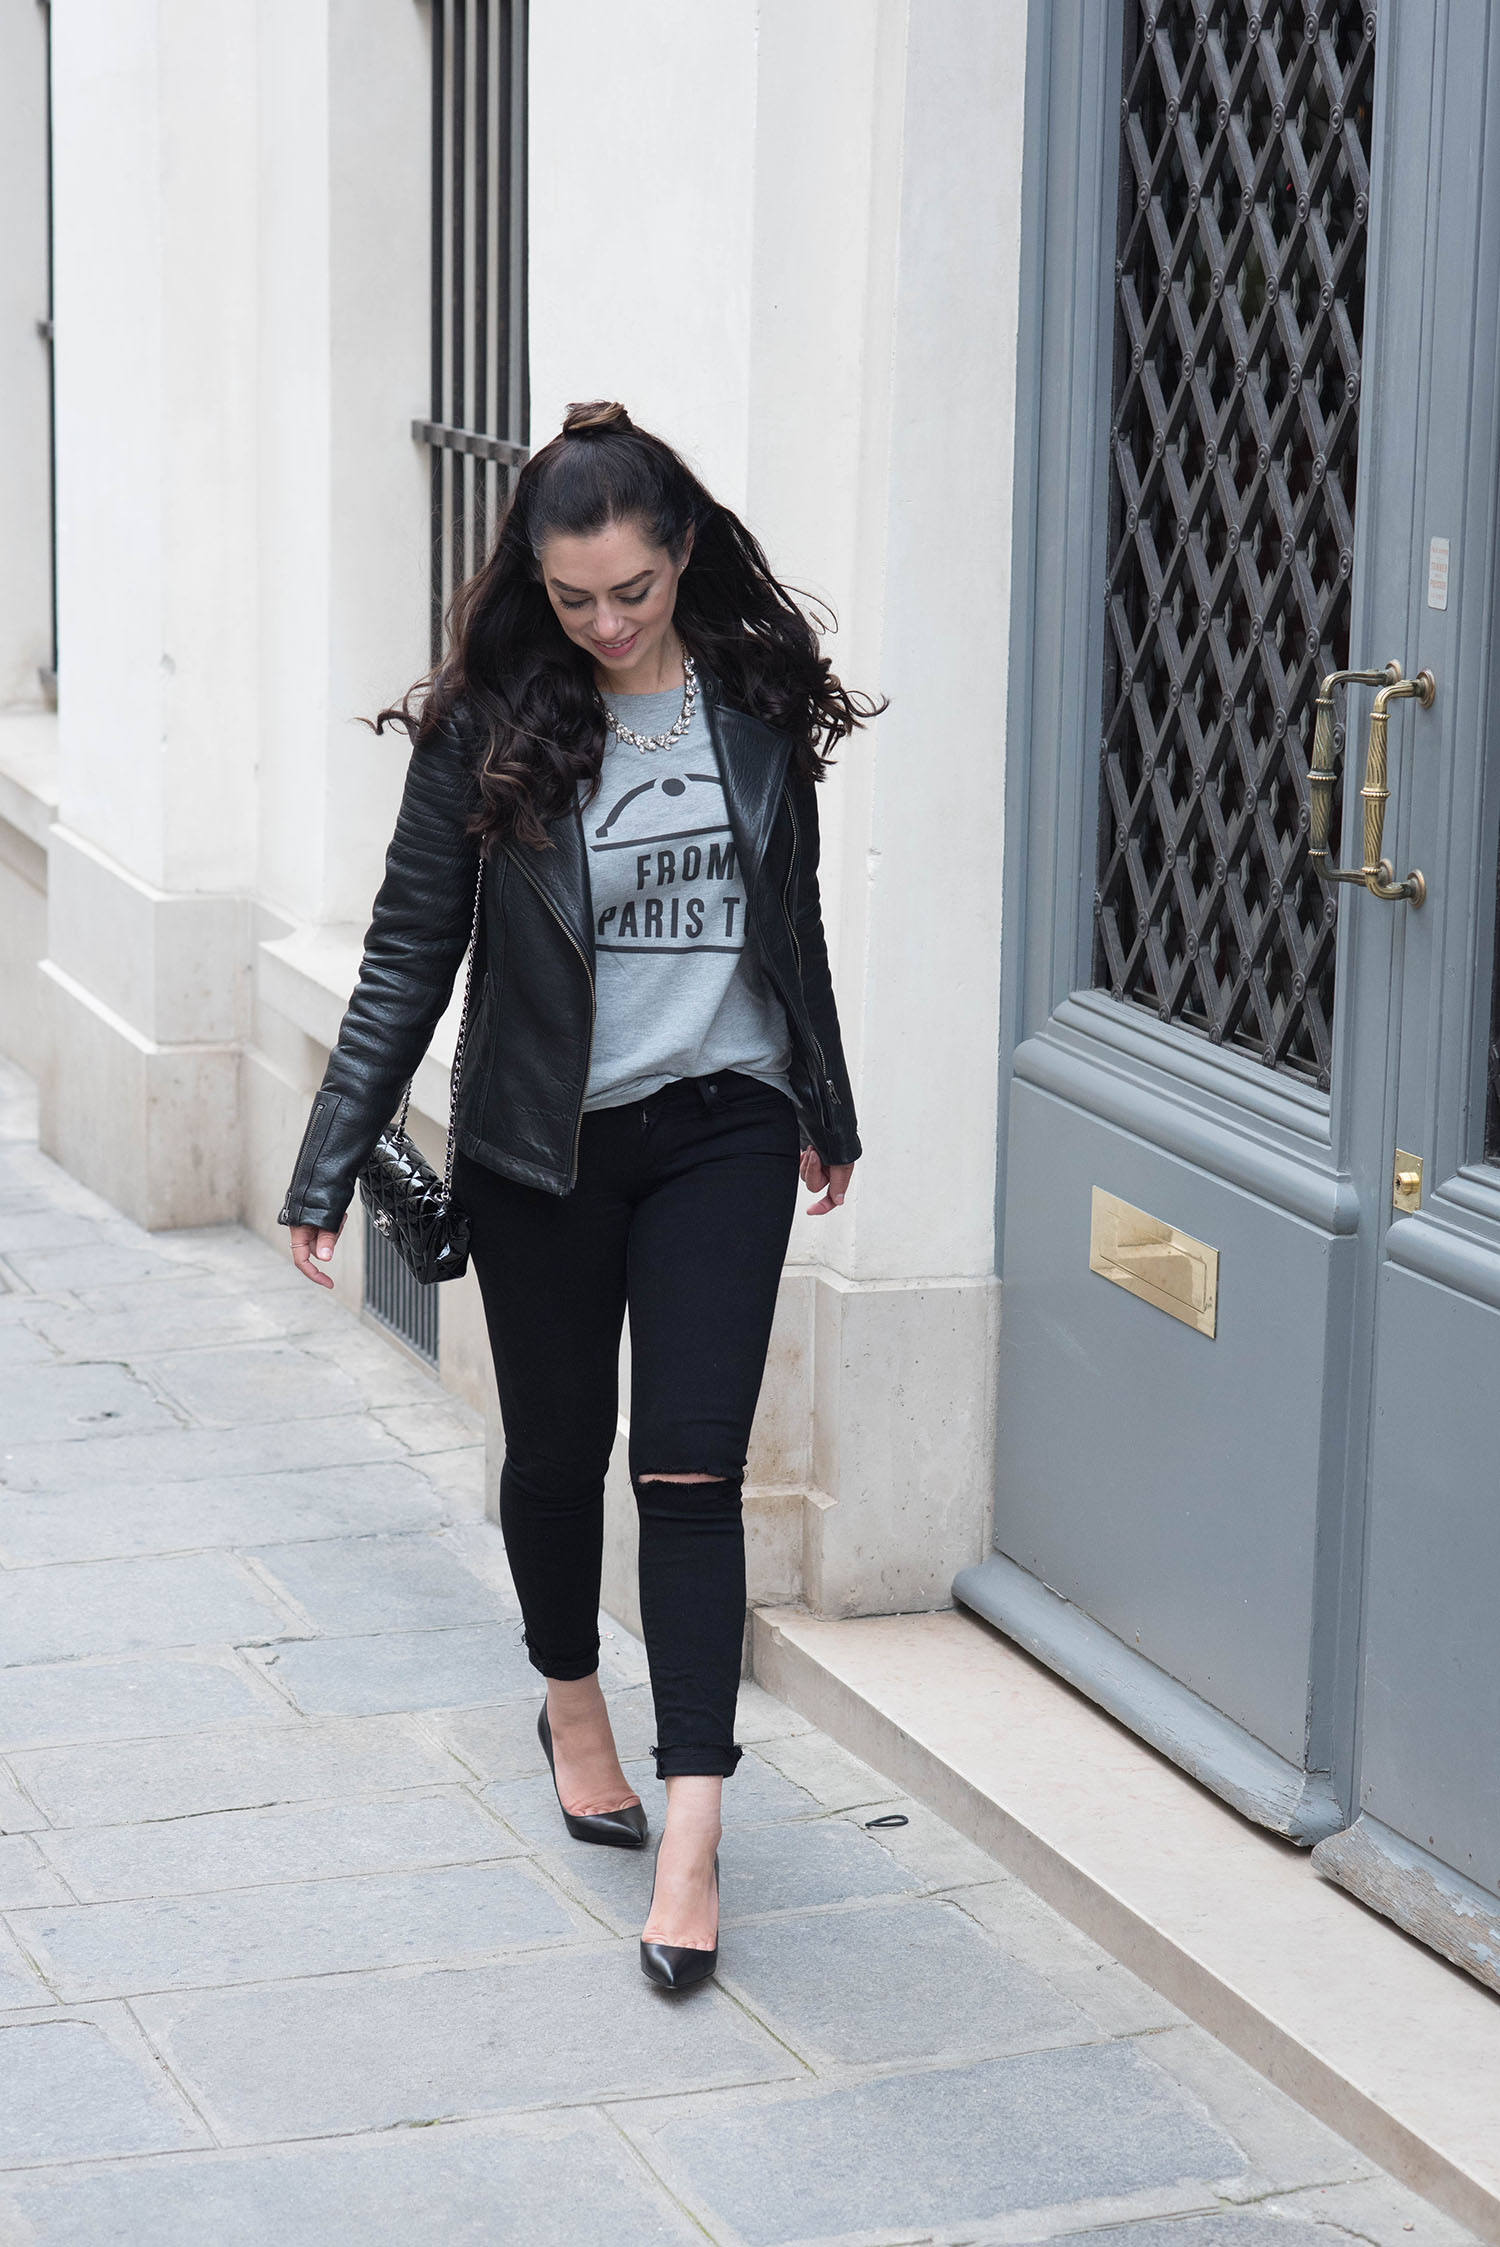 Fashion blogger Cee Fardoe of Coco & Vera walks in Paris wearing a Floriane Fosso From Paris To... t-shirt and carrying a Chanel Timeless handbag